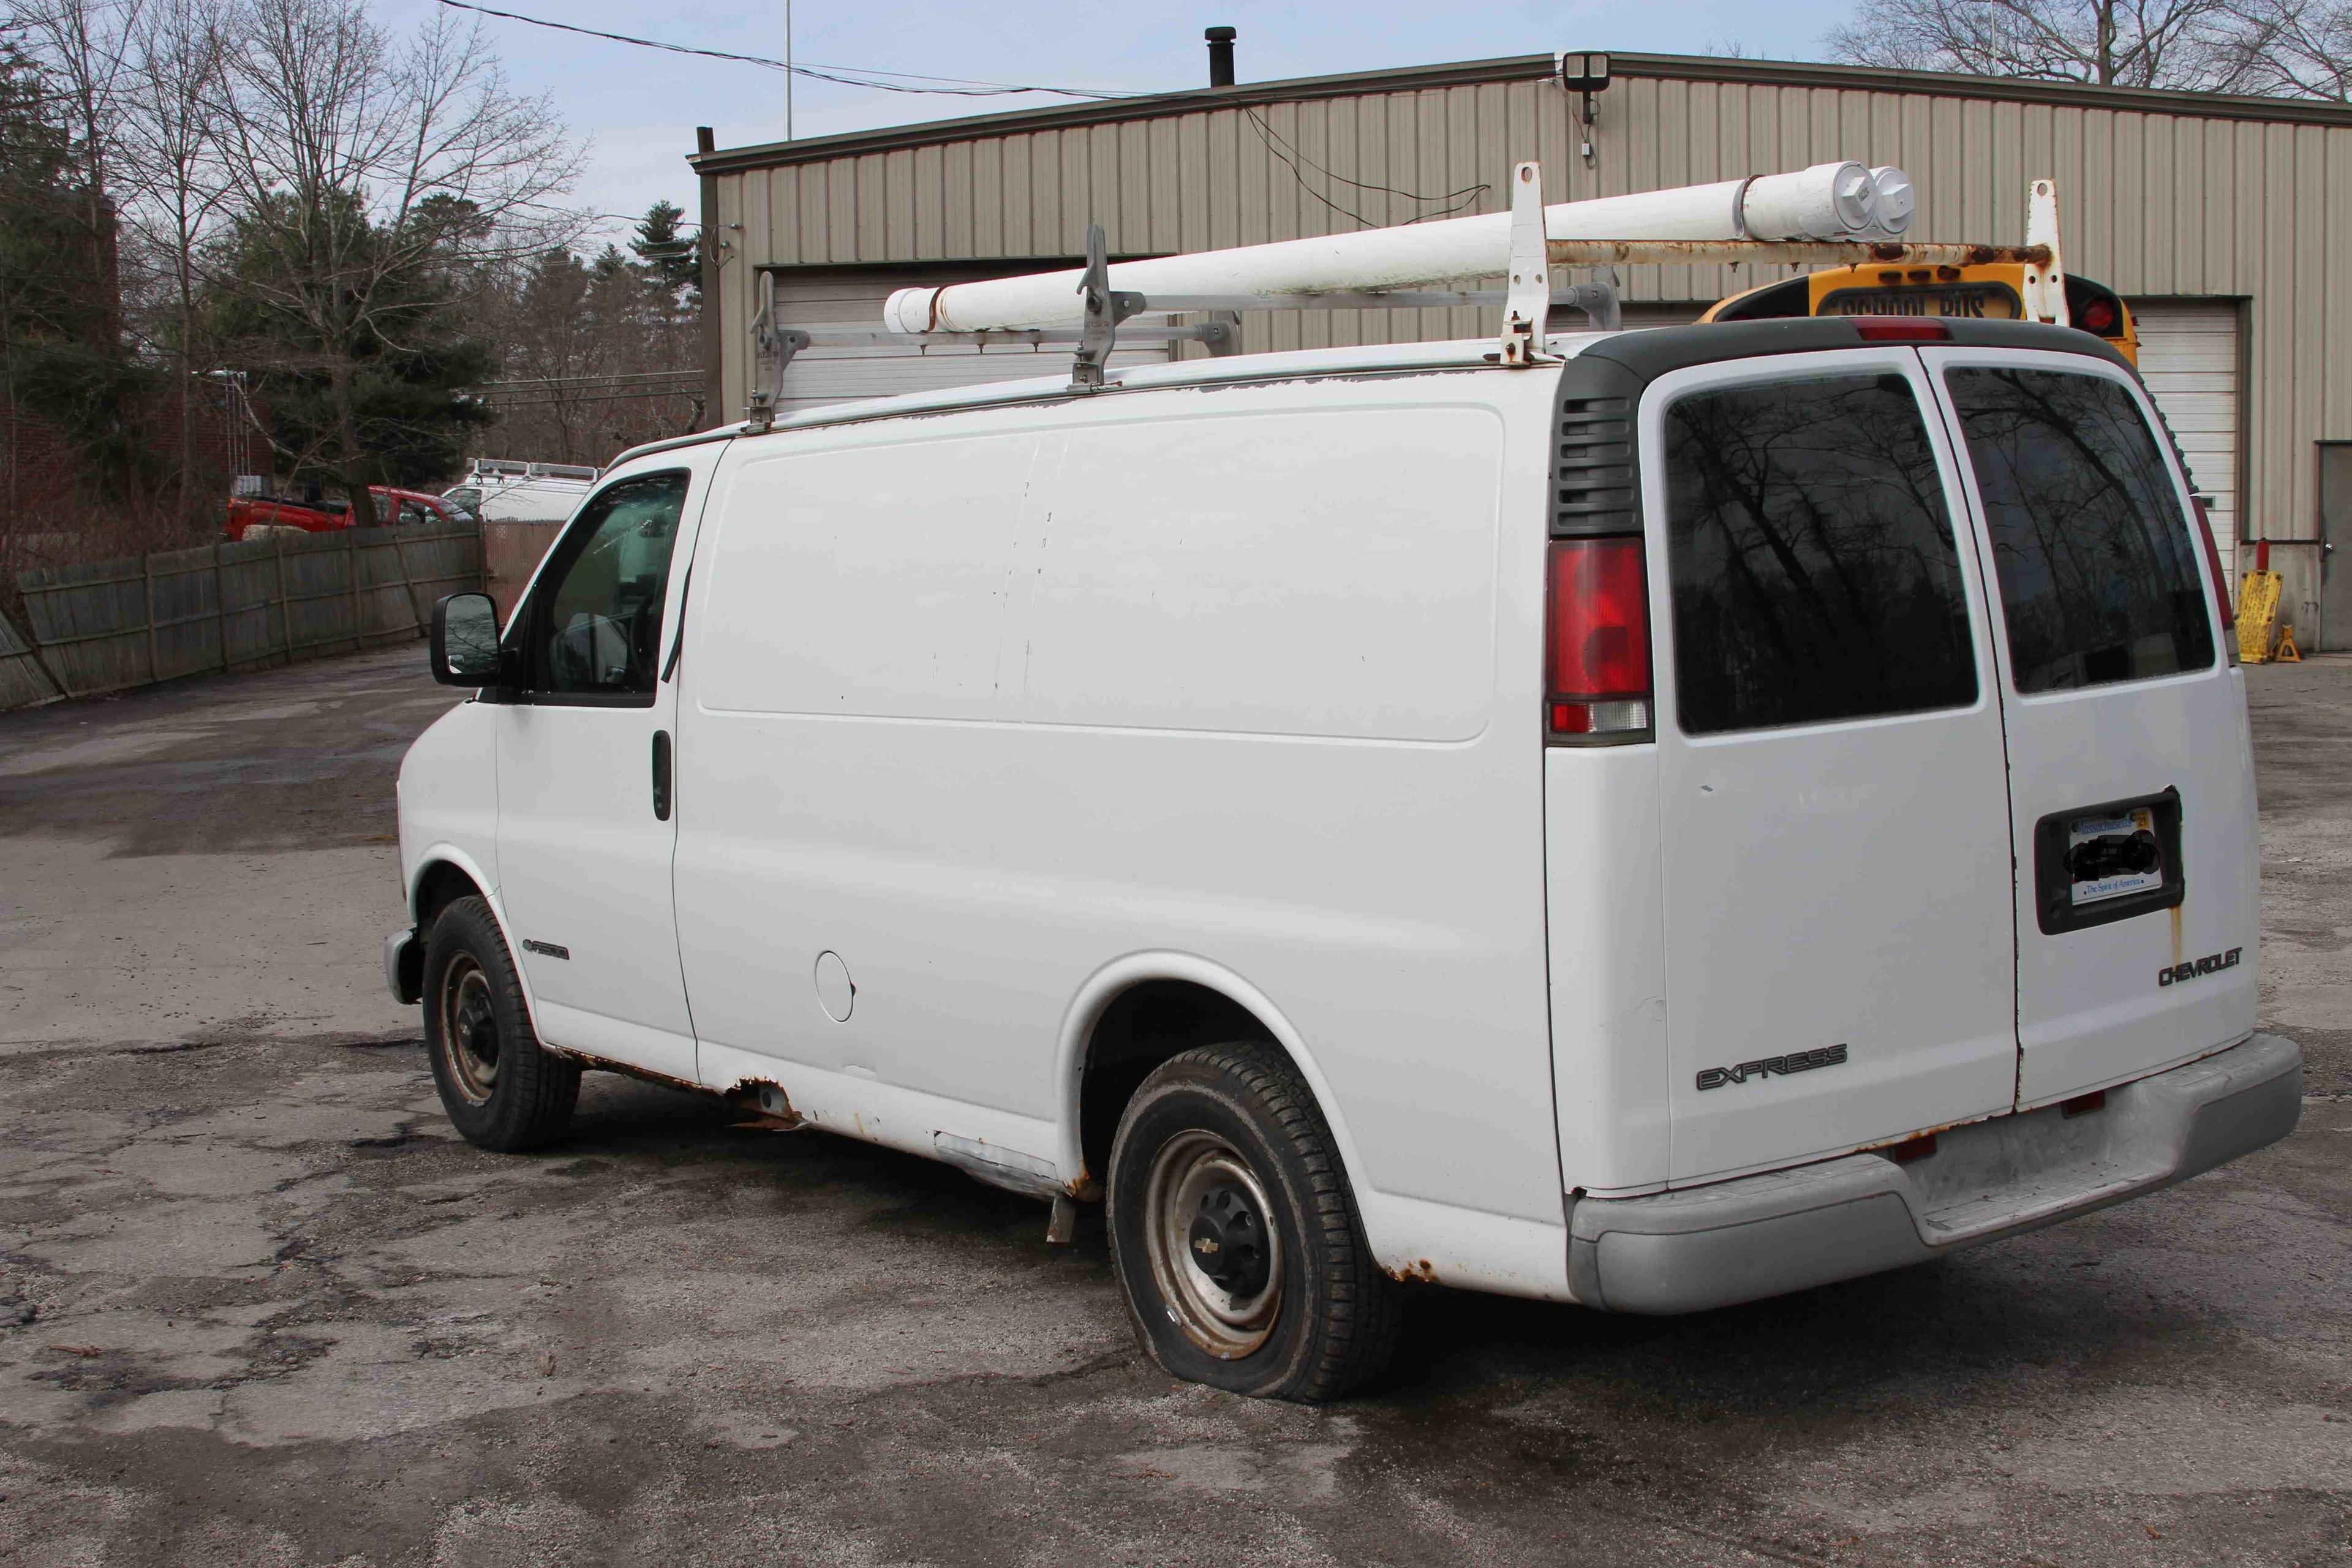 2000 Chevy Express